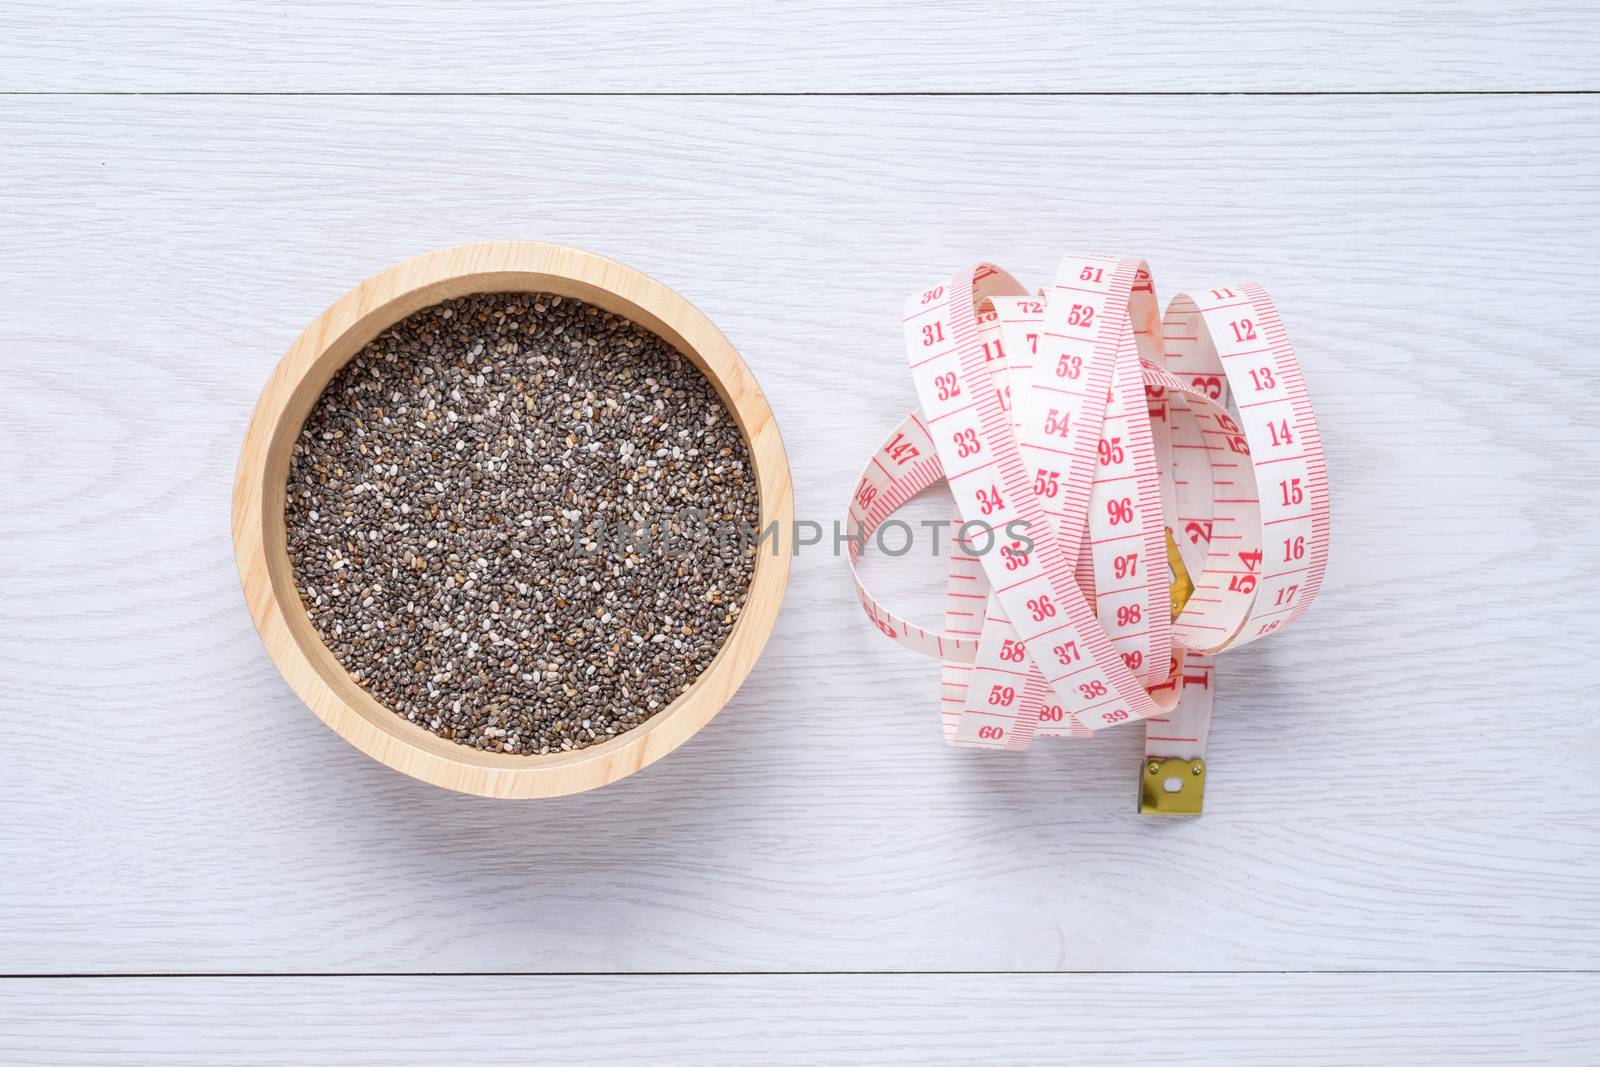 chai seeds and tape measure by zneb076